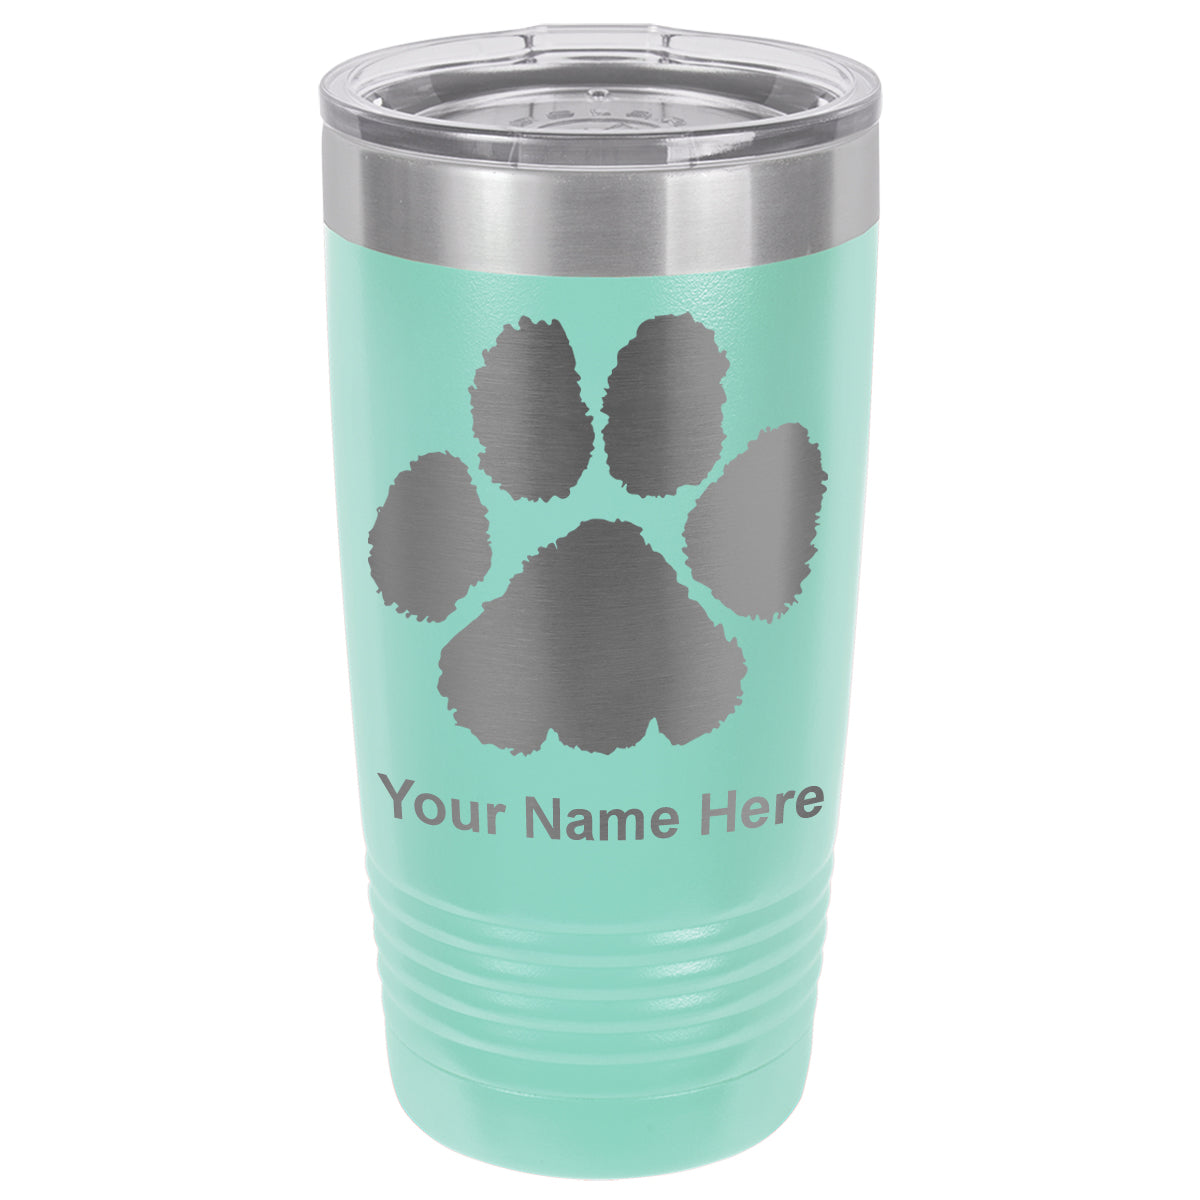 20oz Vacuum Insulated Tumbler Mug, Paw Print, Personalized Engraving Included